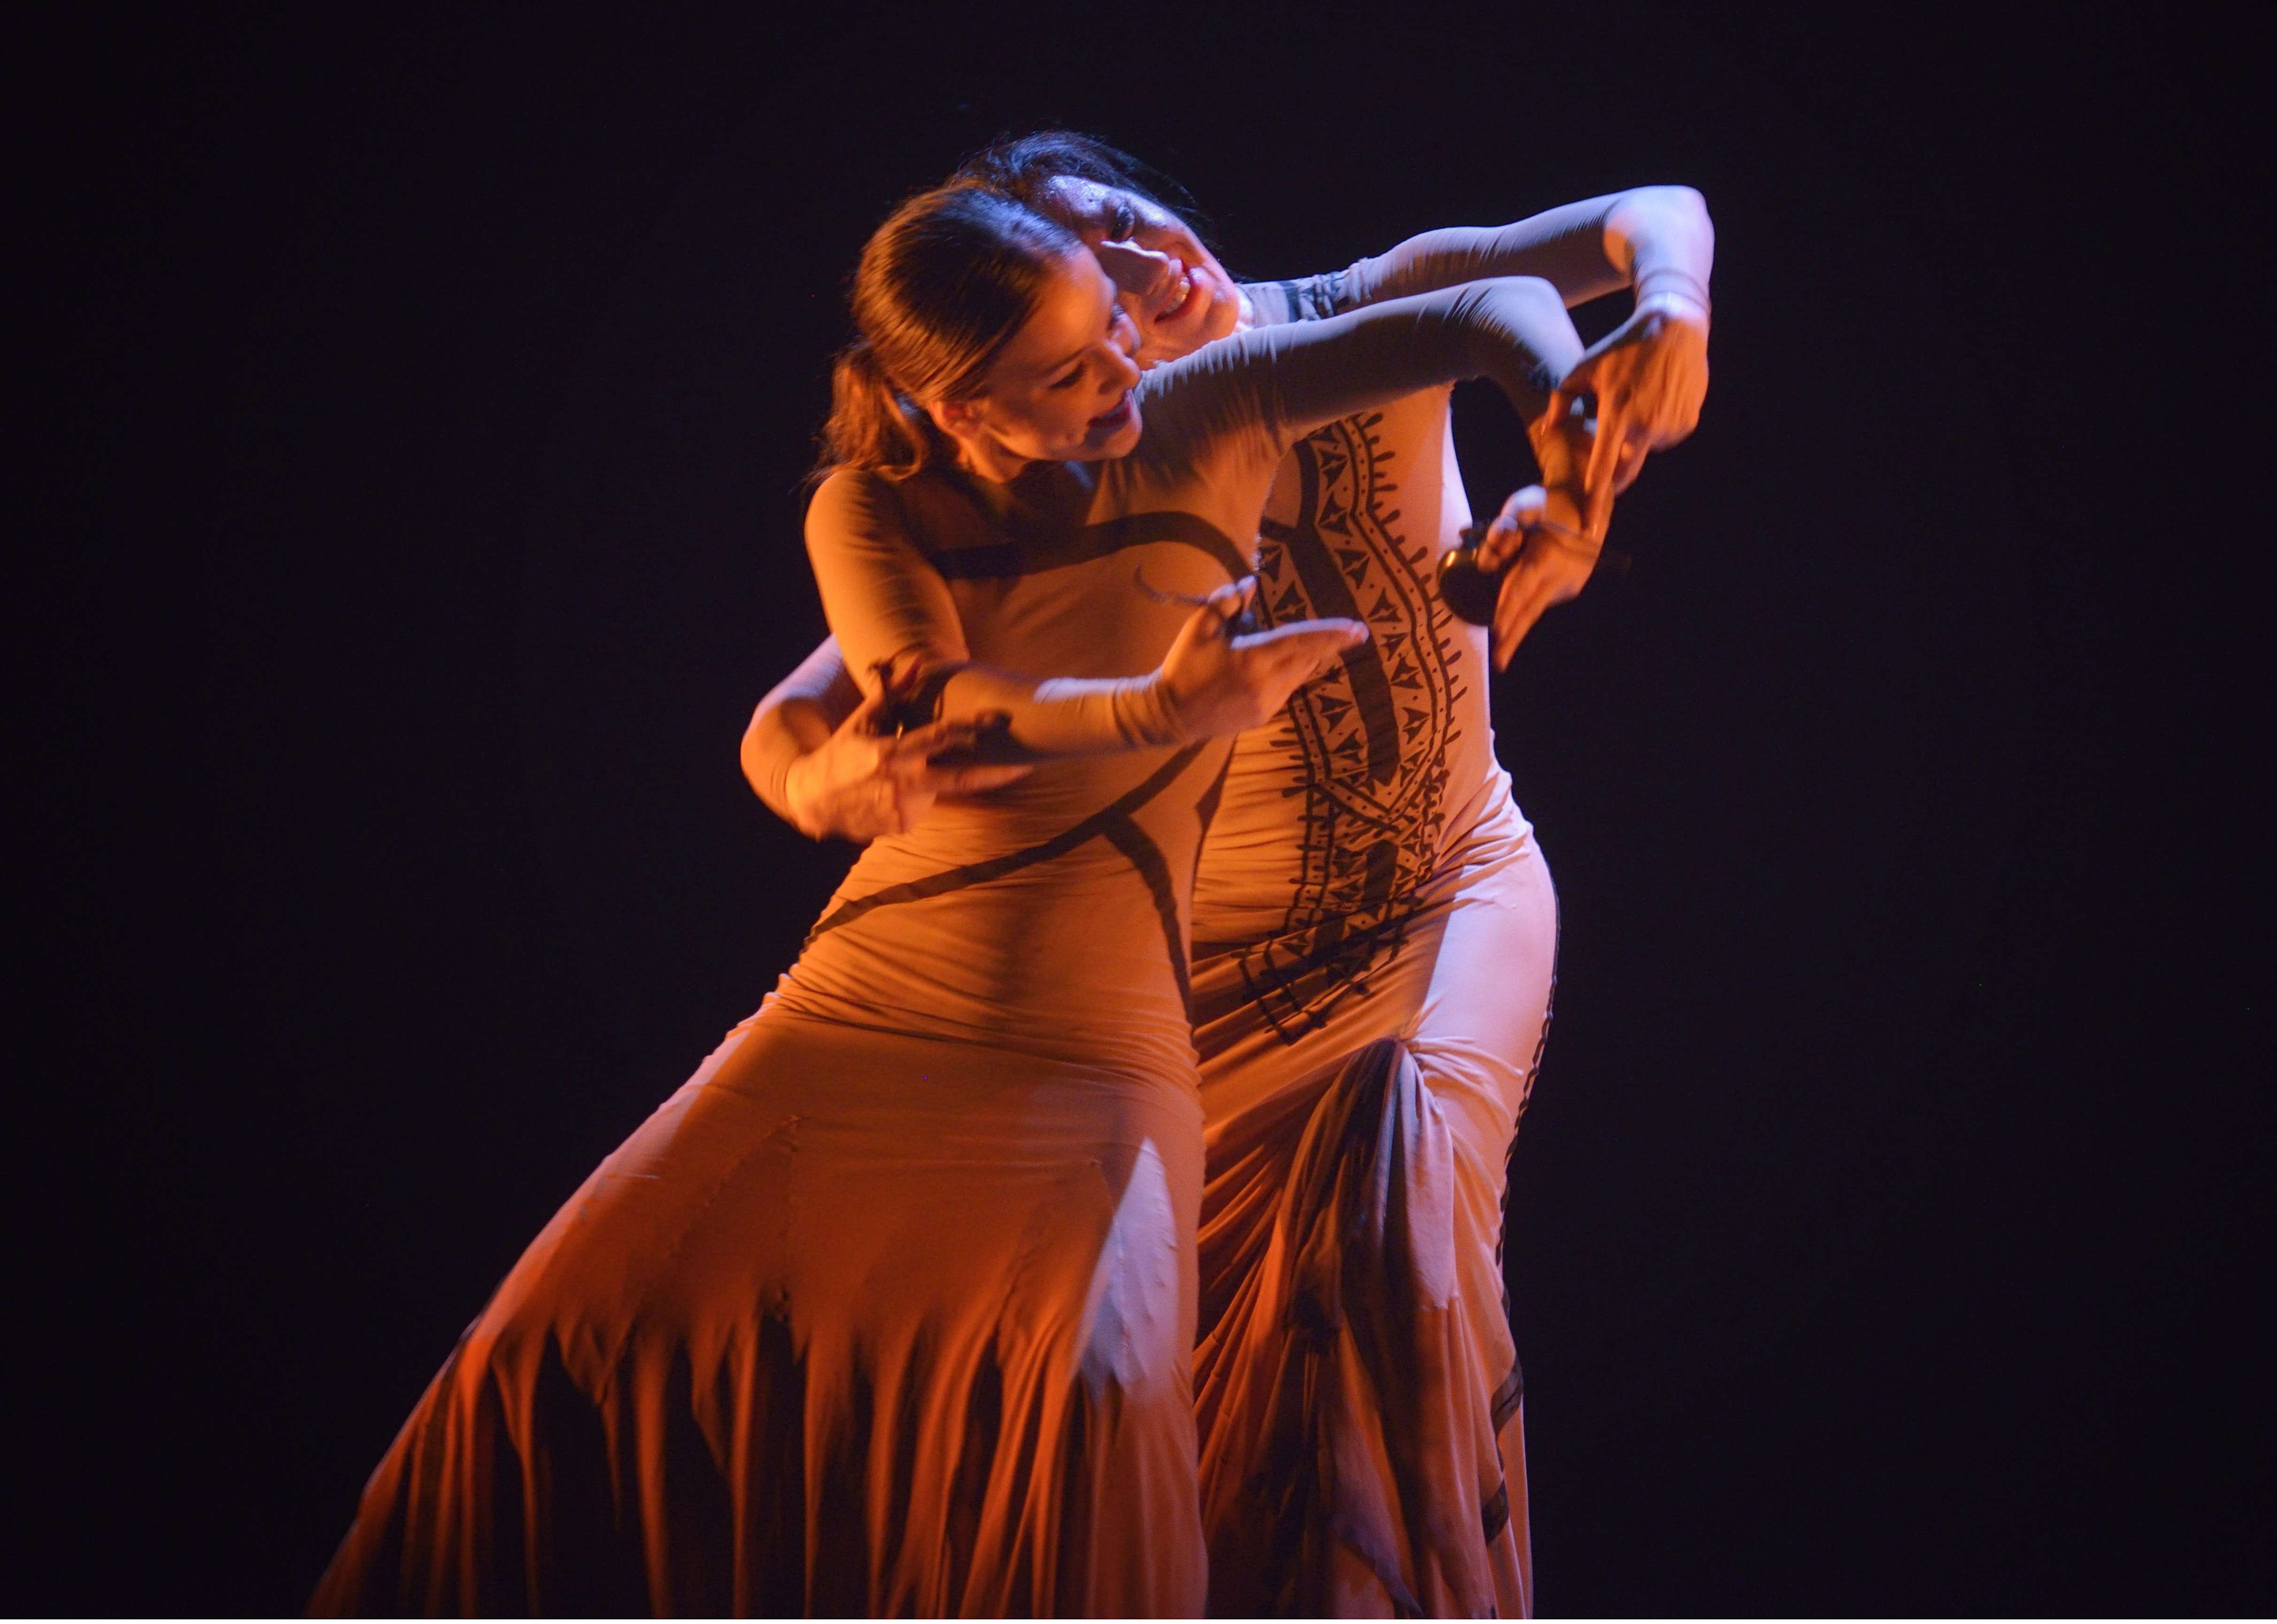 In I, Carmen, flamenco dancer and choreographer María Pagés sets out to reclaim the myth behind classical opera’s most provocative gypsy.